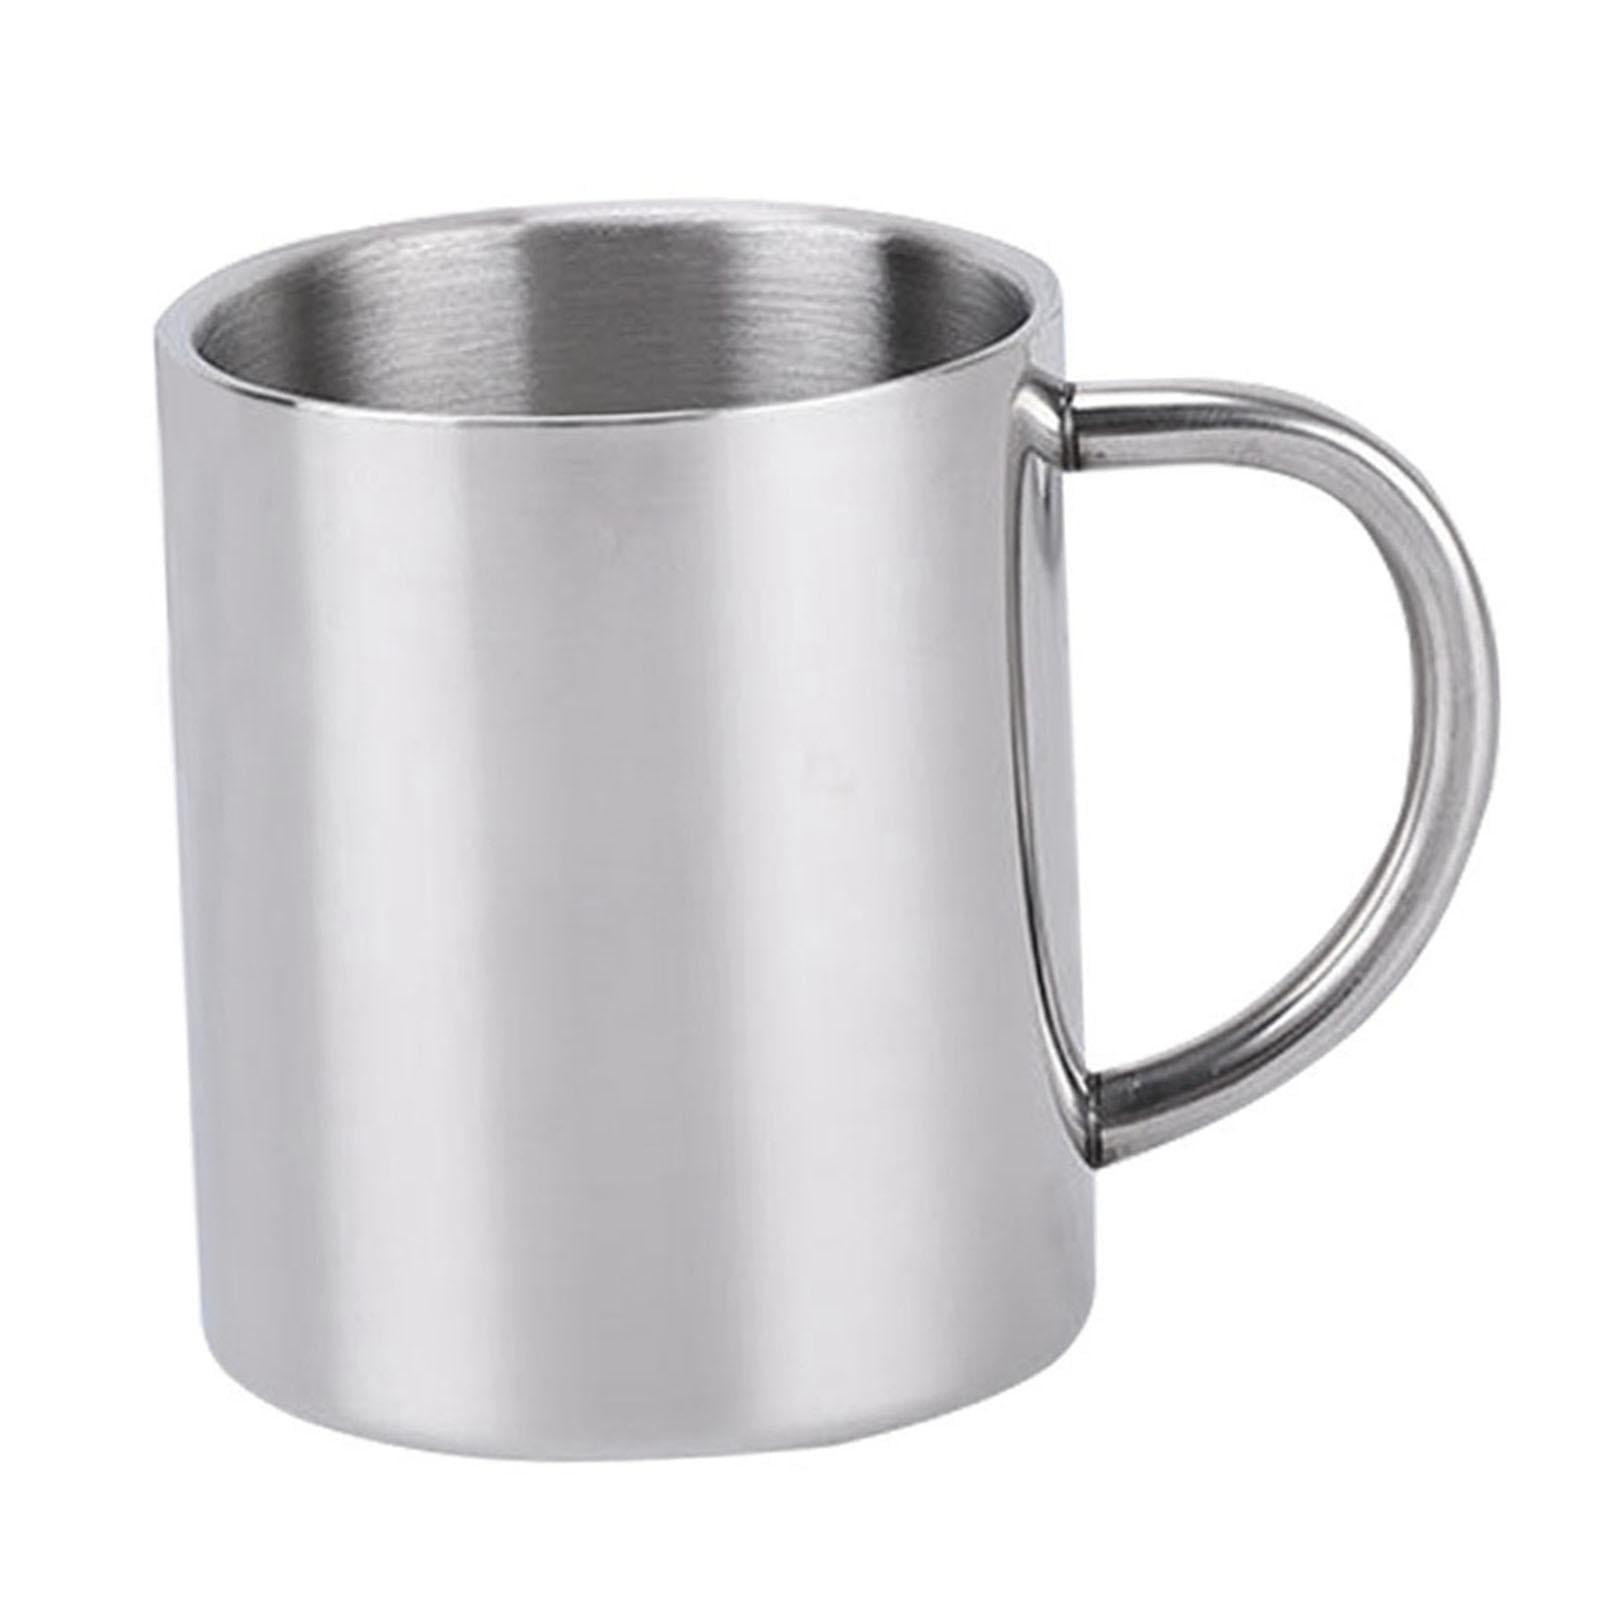 300ml Portable Mug Stainless Steel Double Walled Insulated Coffee Beer Cup Home 